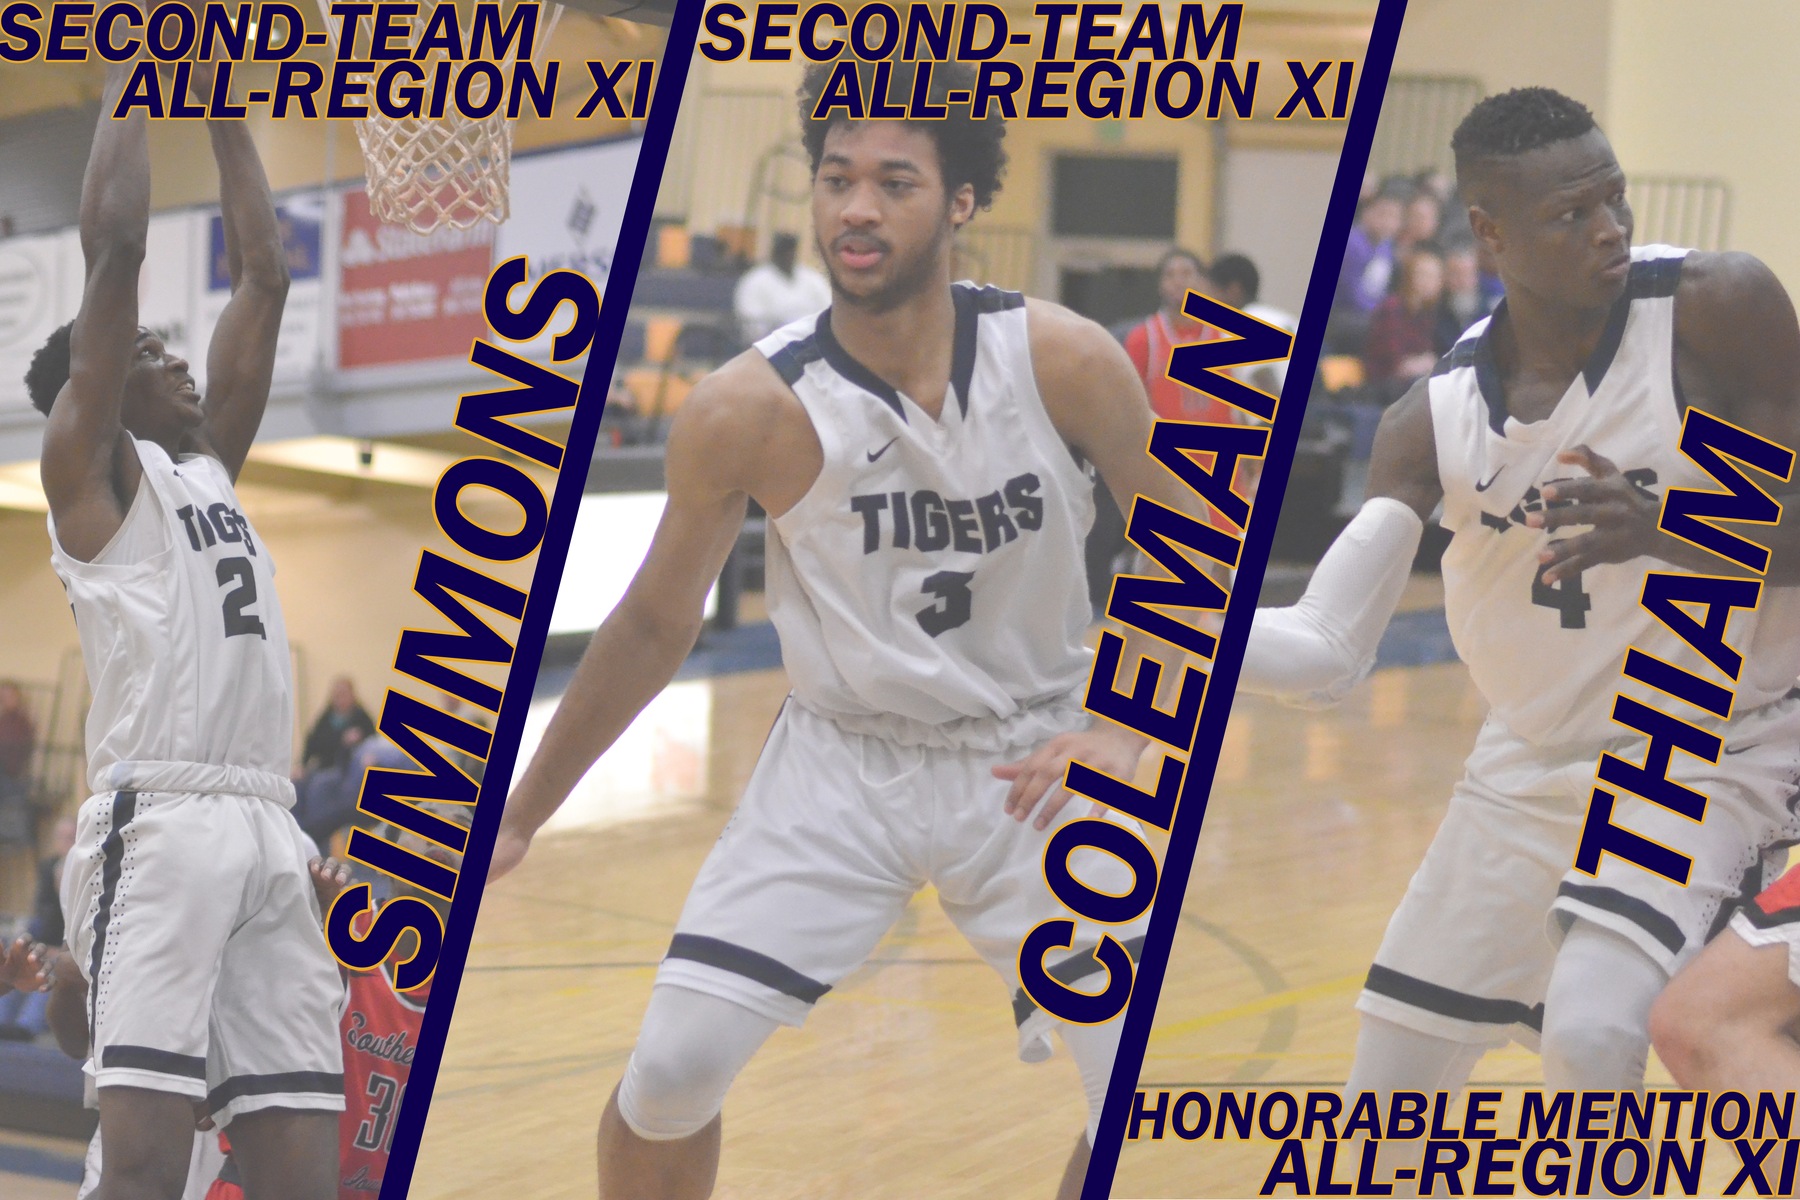 Brando Simmons, Jamir Coleman, and Mohamed Thiam have been named to the NJCAA All-Region XI team